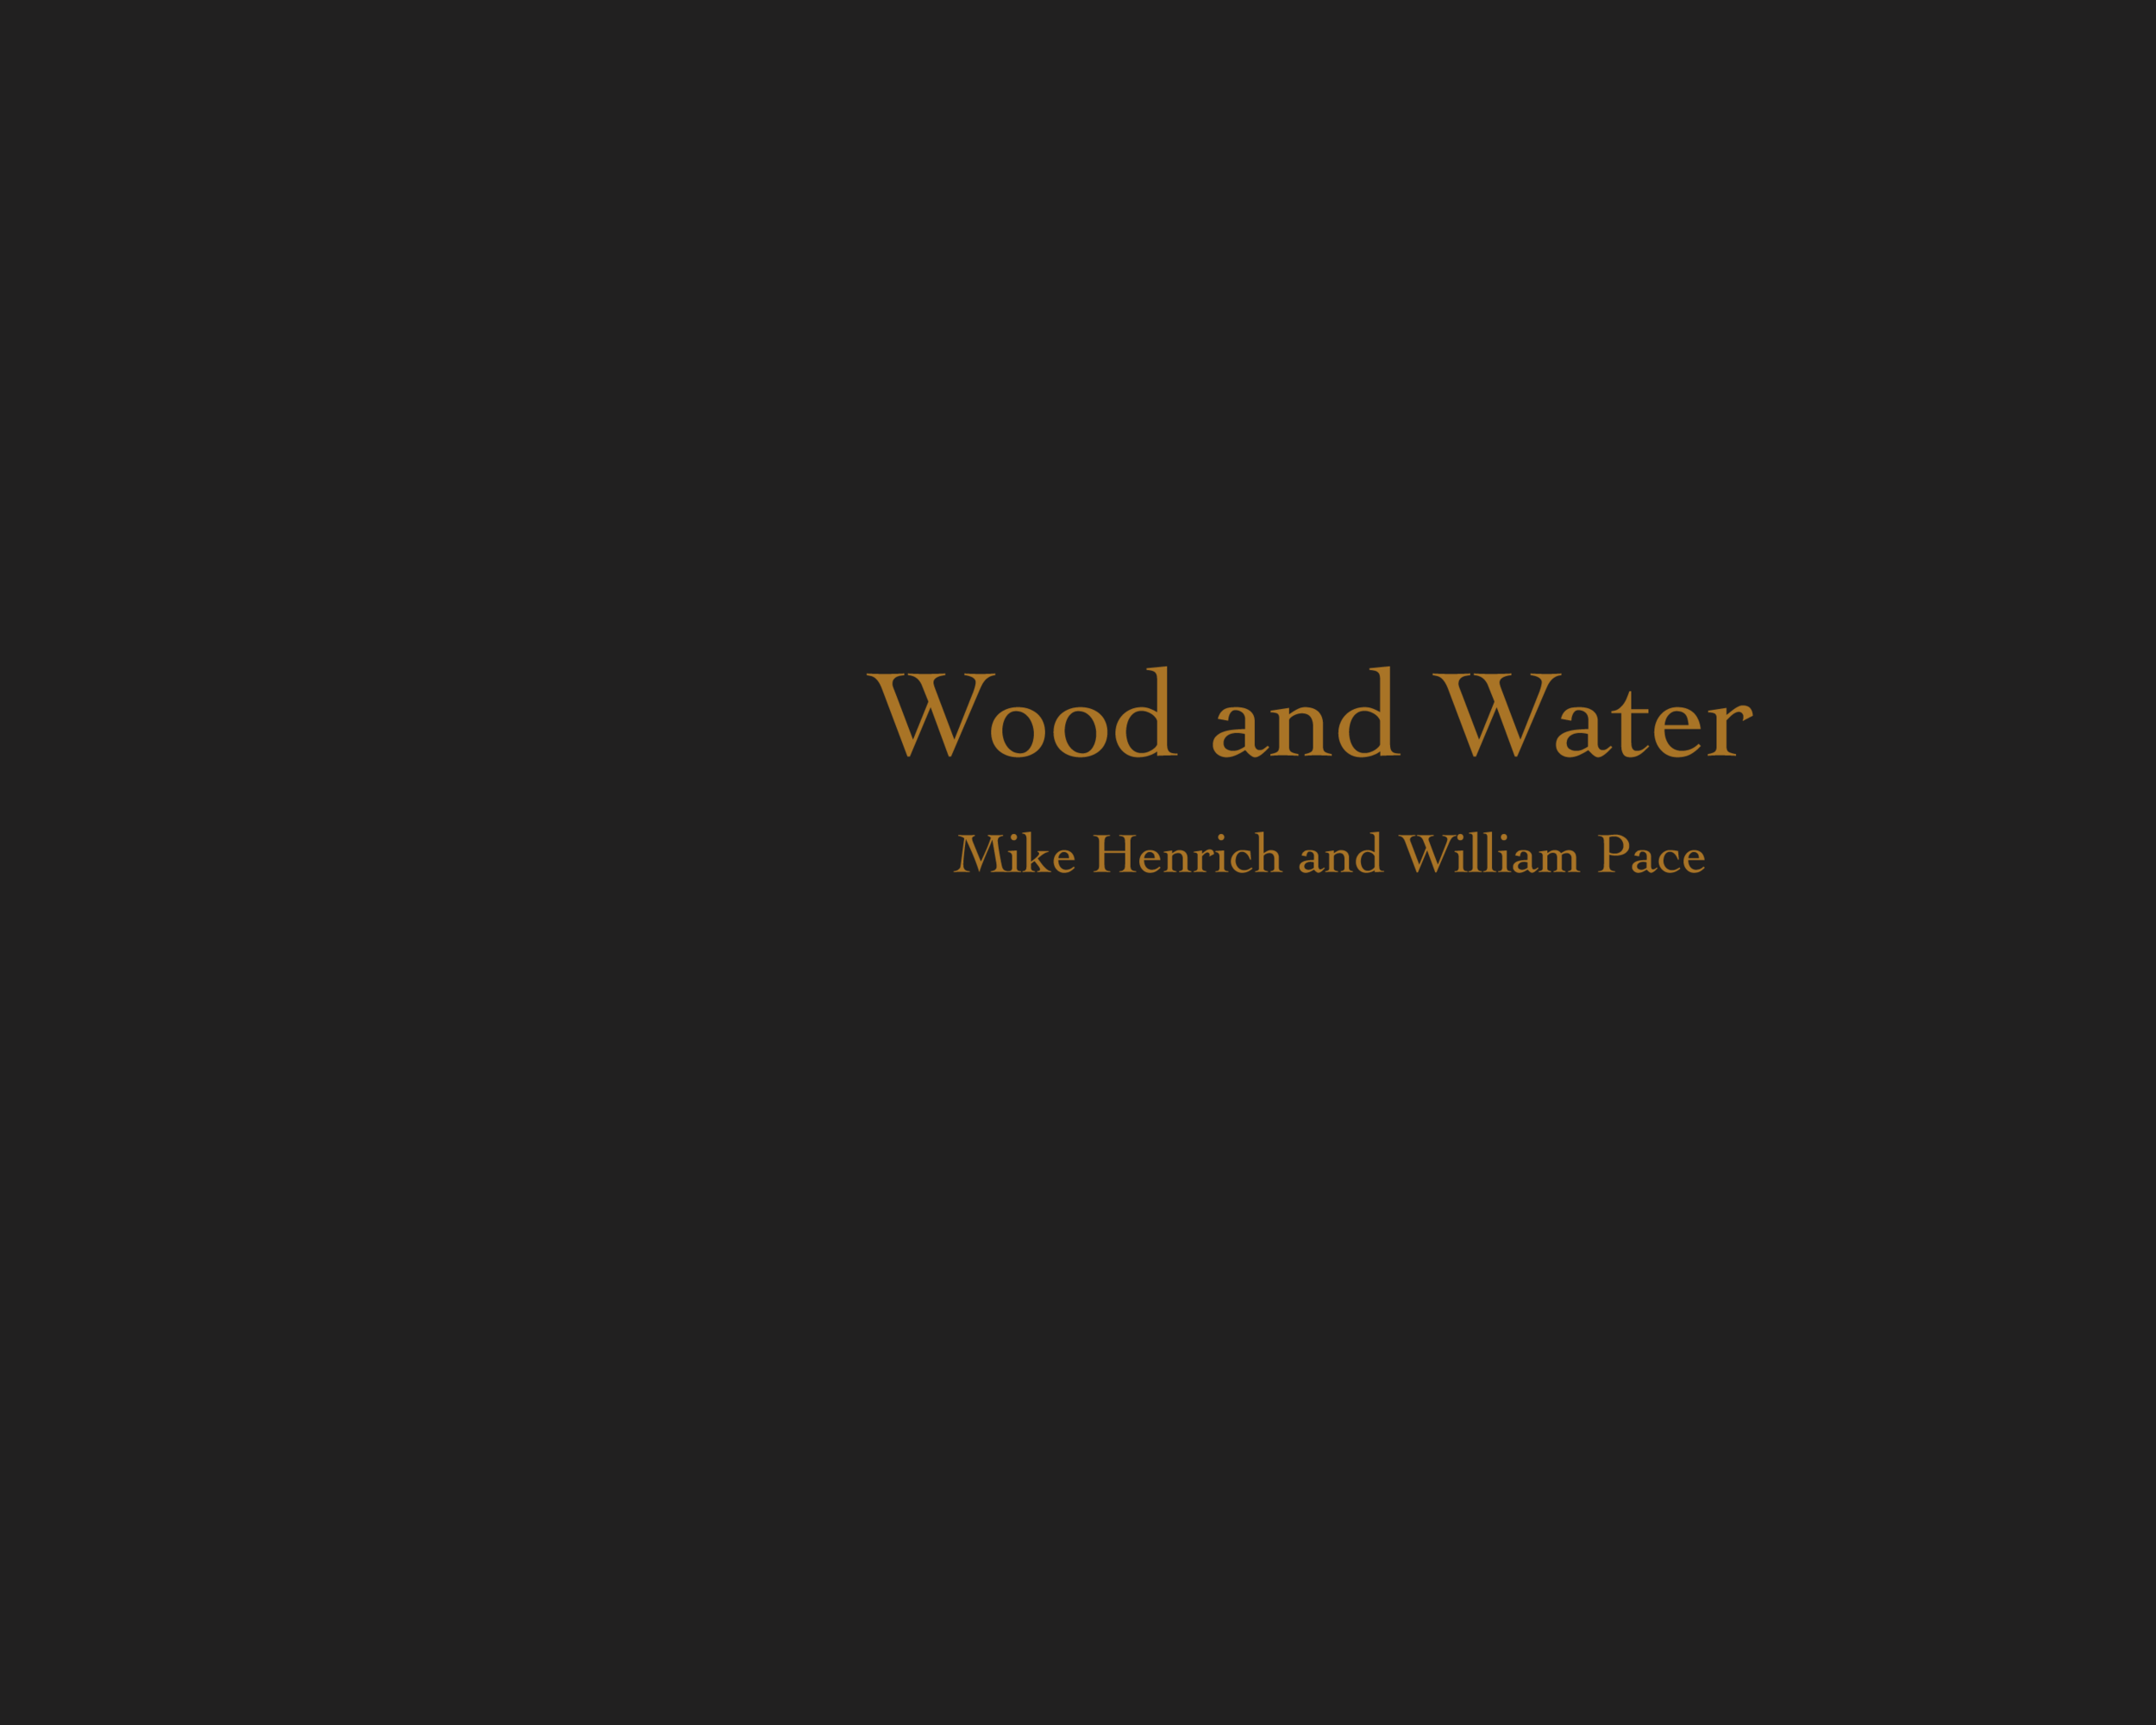   http://www.blurb.com/books/909519-wood-and-water  